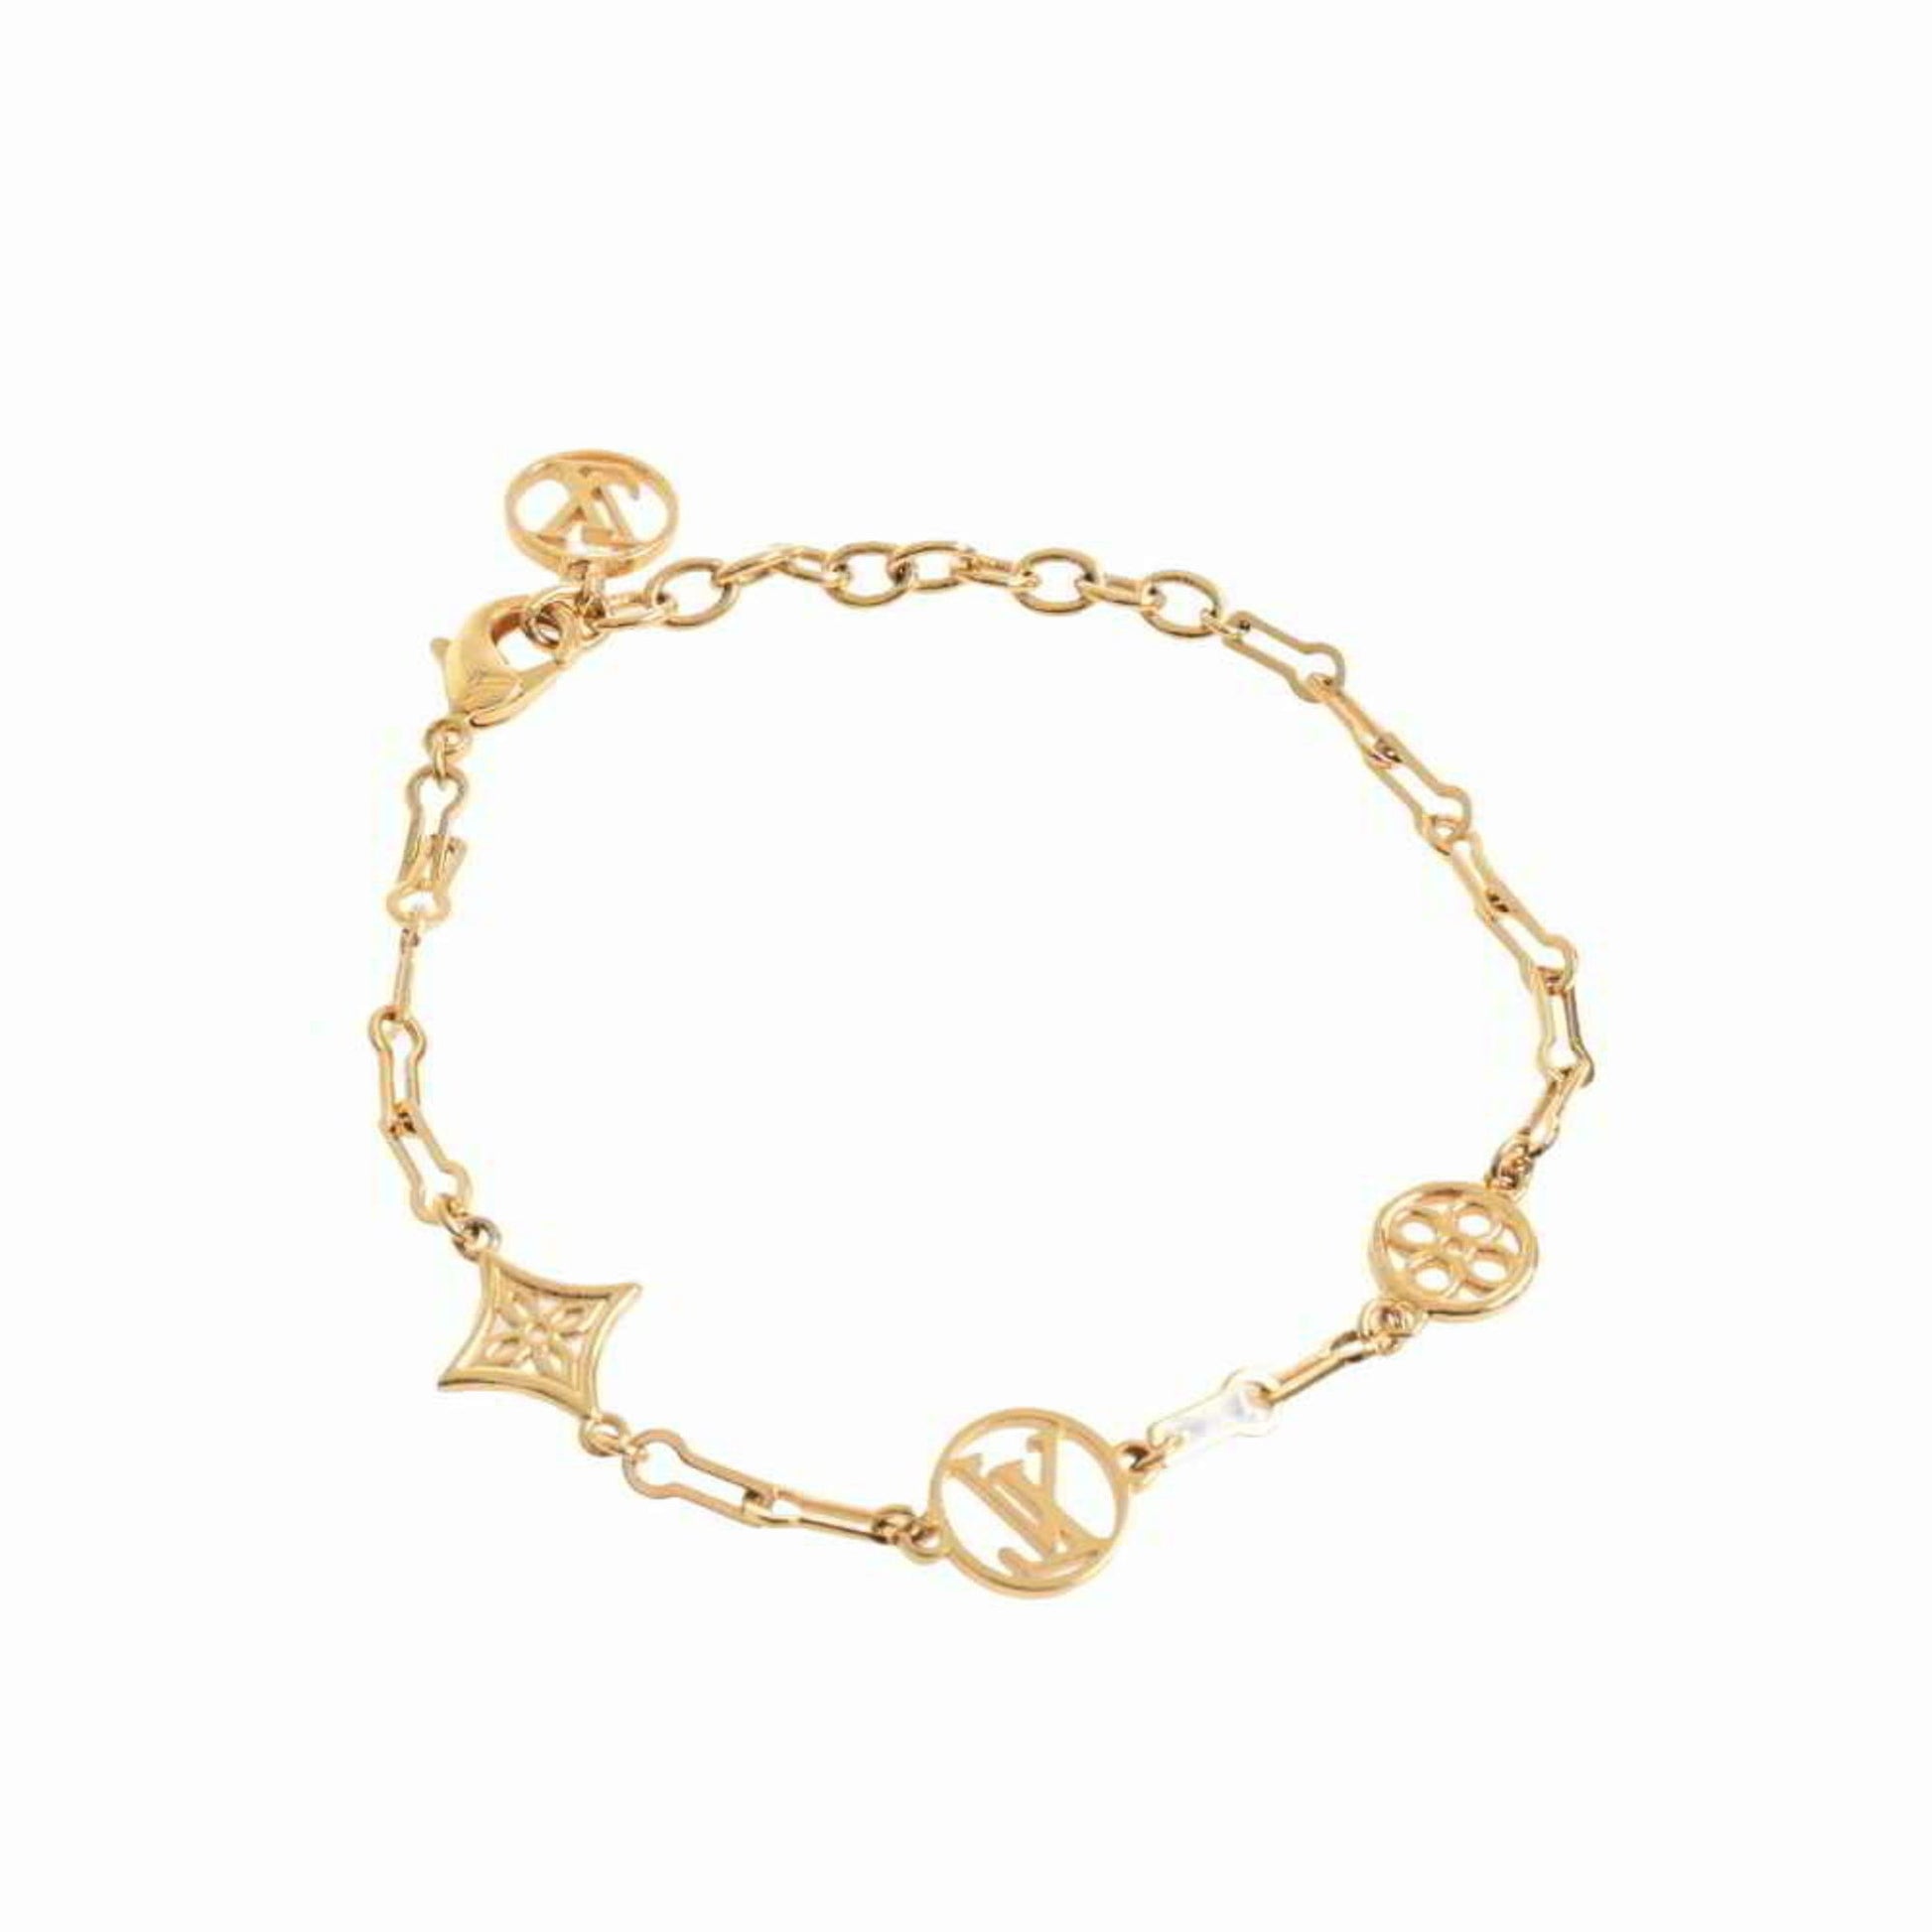 Louis Vuitton, Jewelry, Louis Vuitton Brasserie Forever Young Bracelet  Gold Metal